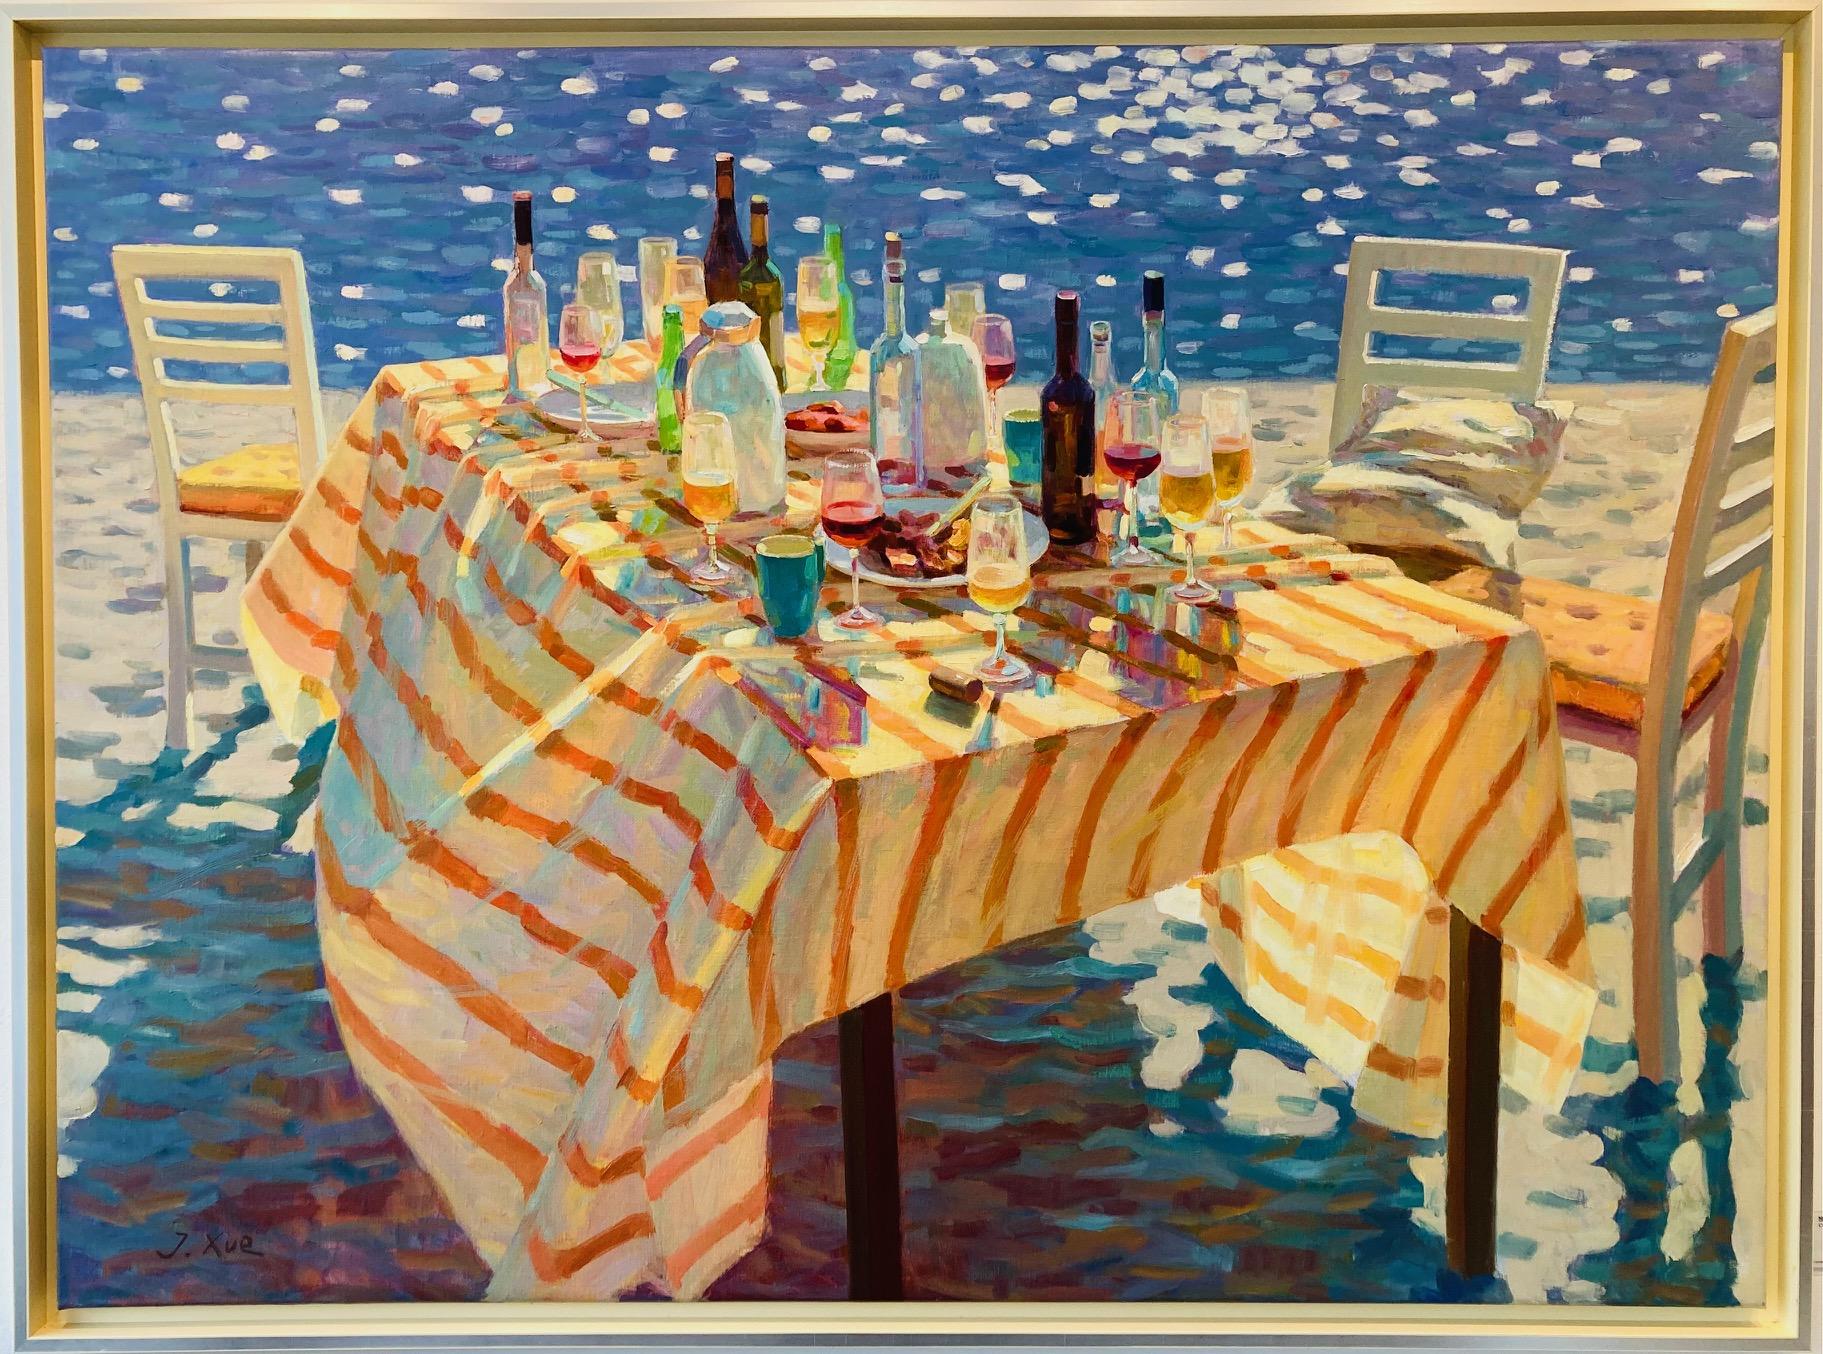 Juane Xue Landscape Painting - Sweet Memory Oil Painting on Canvas Table Beach Party Sea Wine Beer In Stock